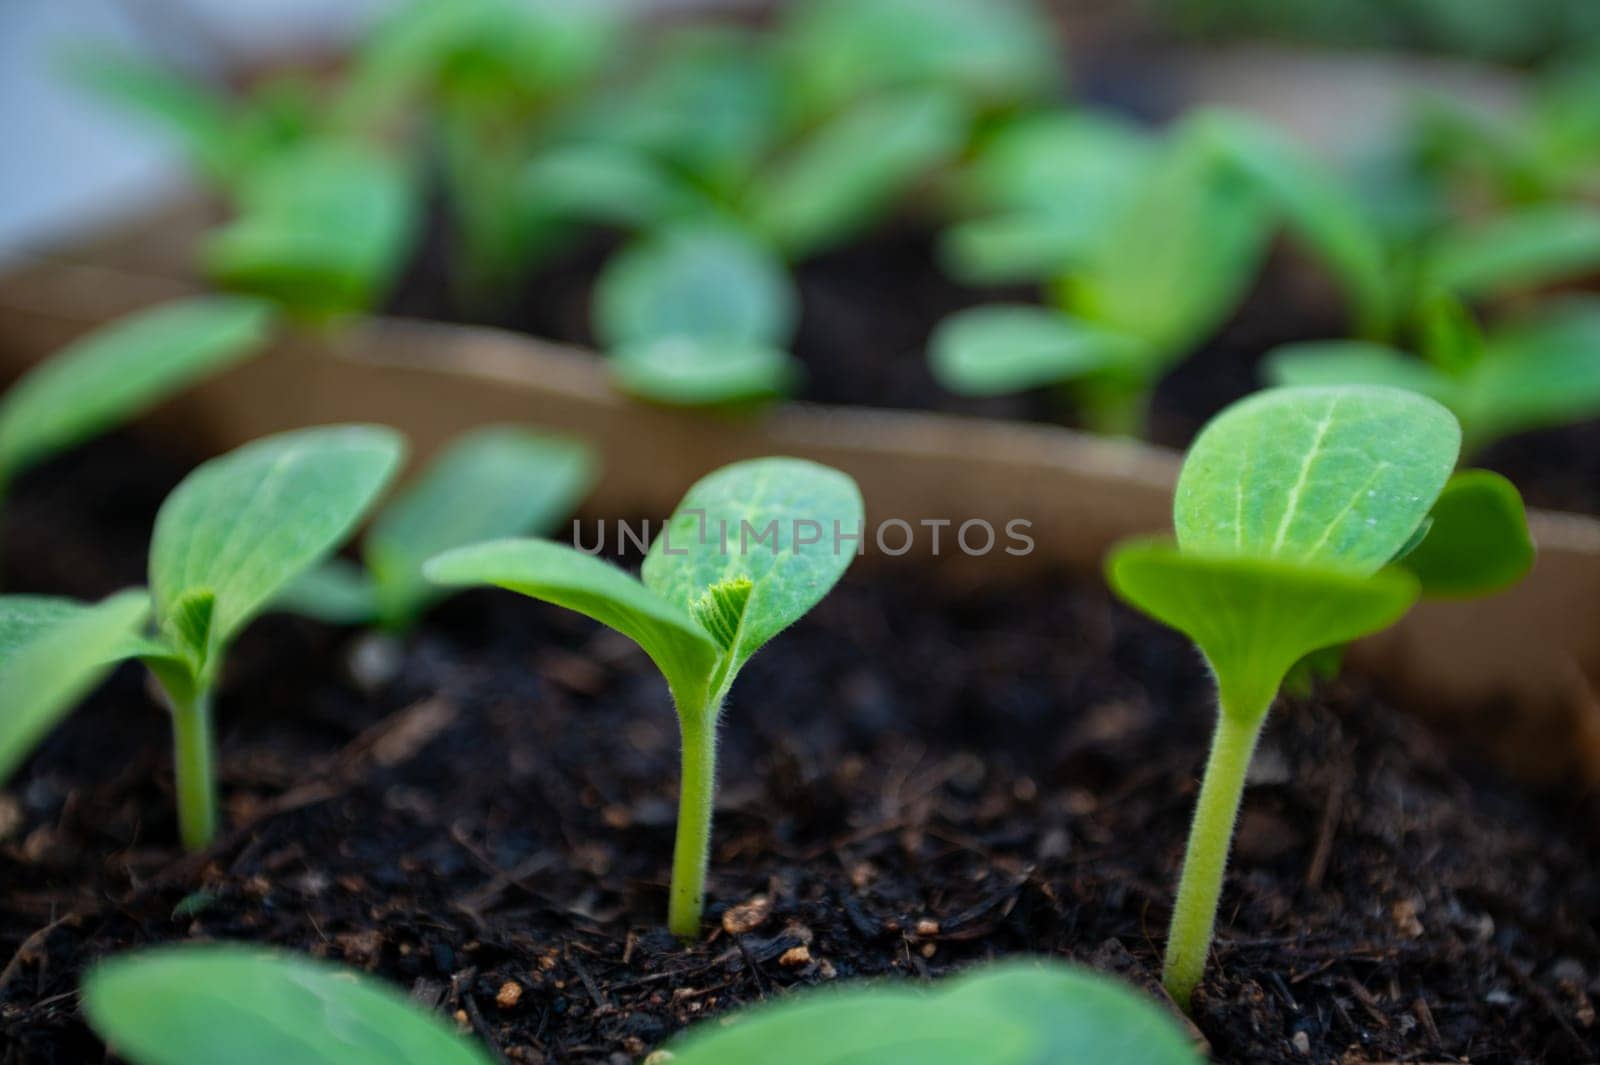 Cucumber seedlings cultivated in greenhouse conditions. Agriculture. Horticulture. Organic eco farming. Gardening by artgf